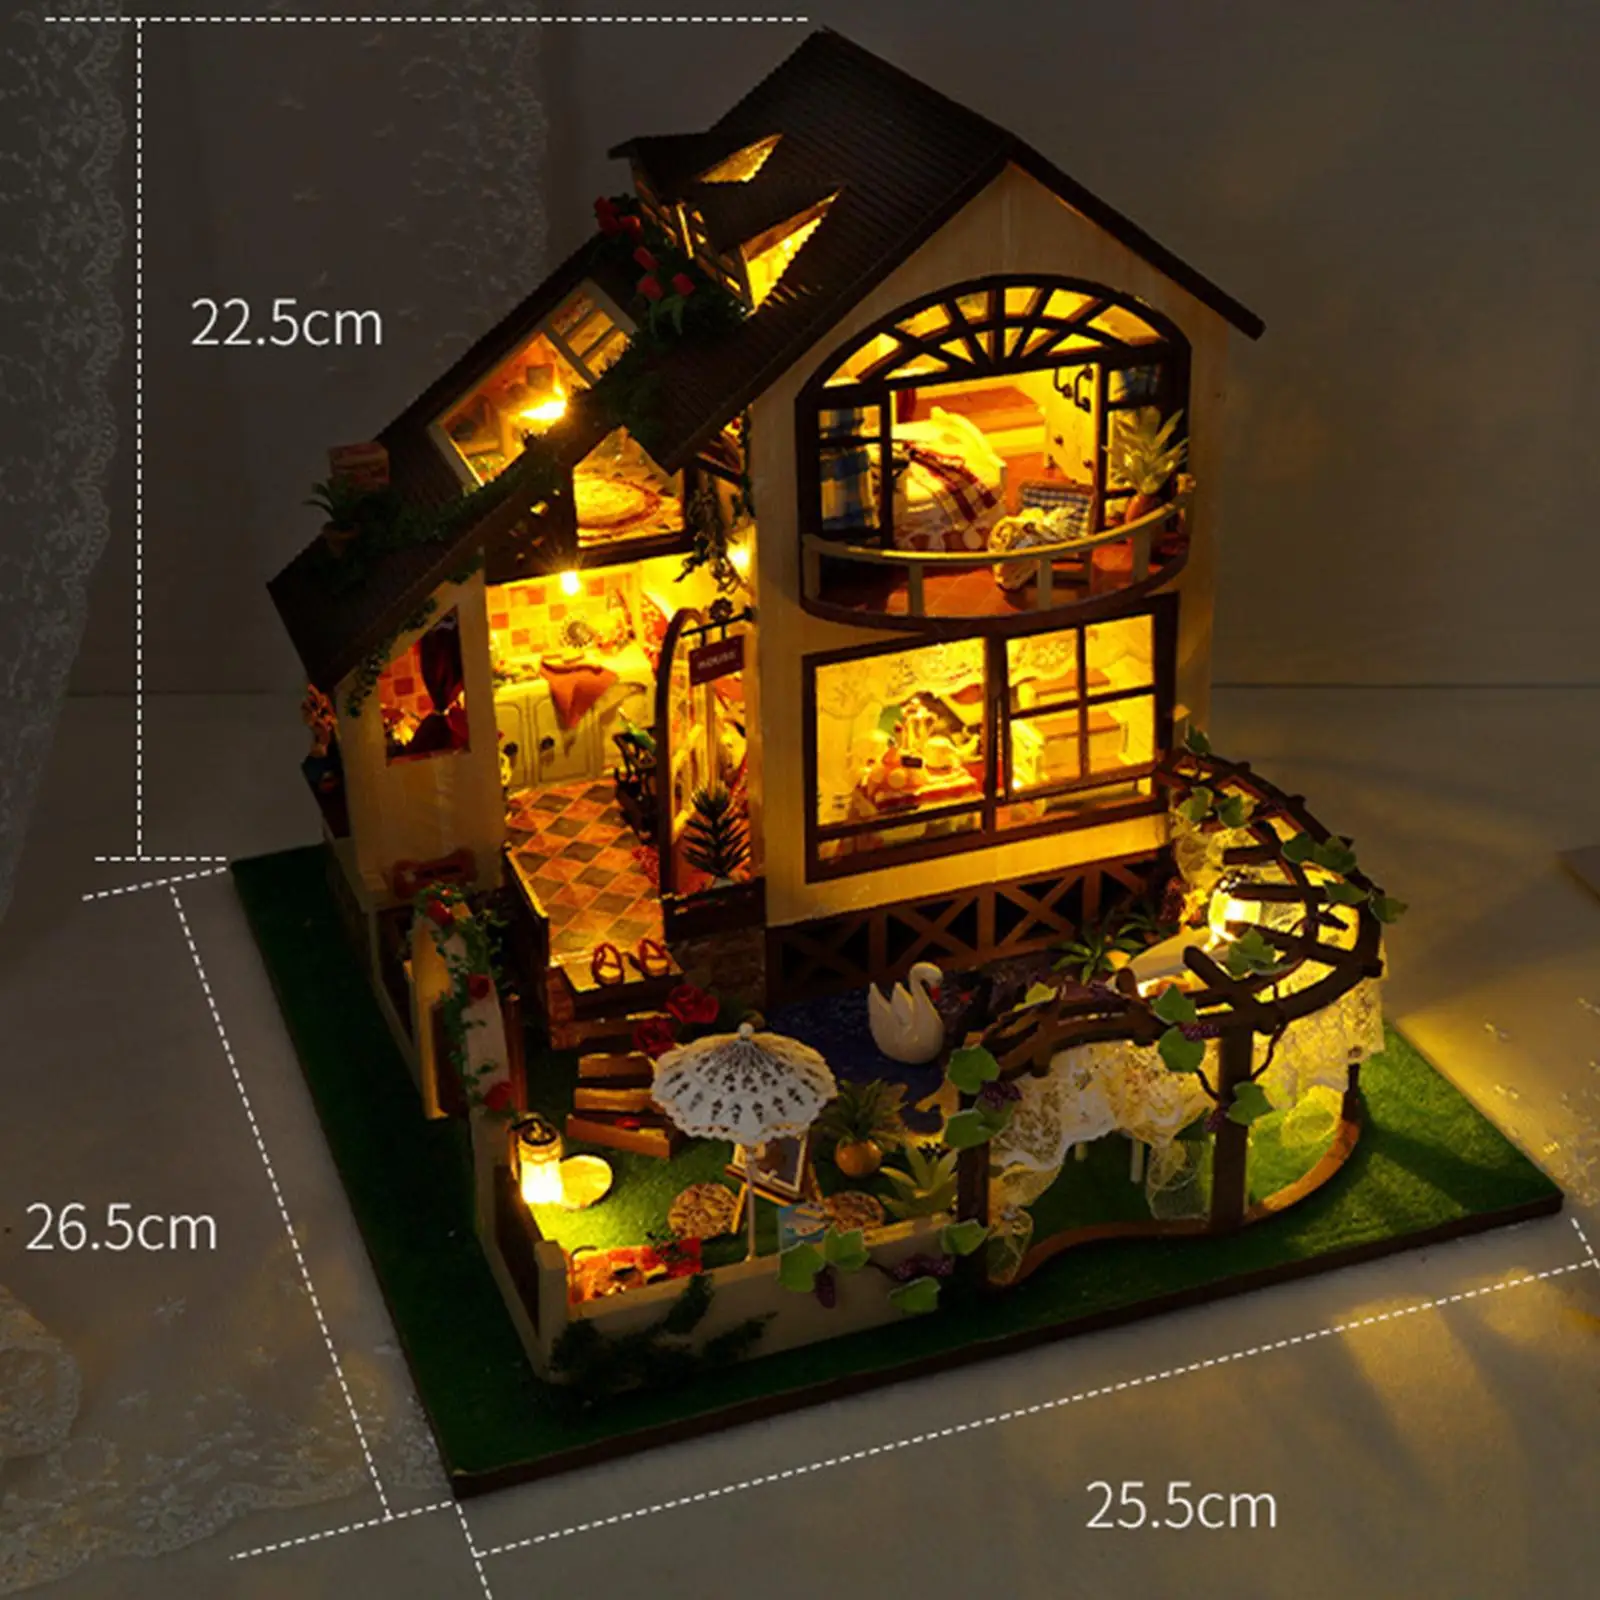 Miniature Dolls House Kits DIY Crafts Tiny Building Kits Handmade Doll House with Accessories for Adults Kids Birthday Gift